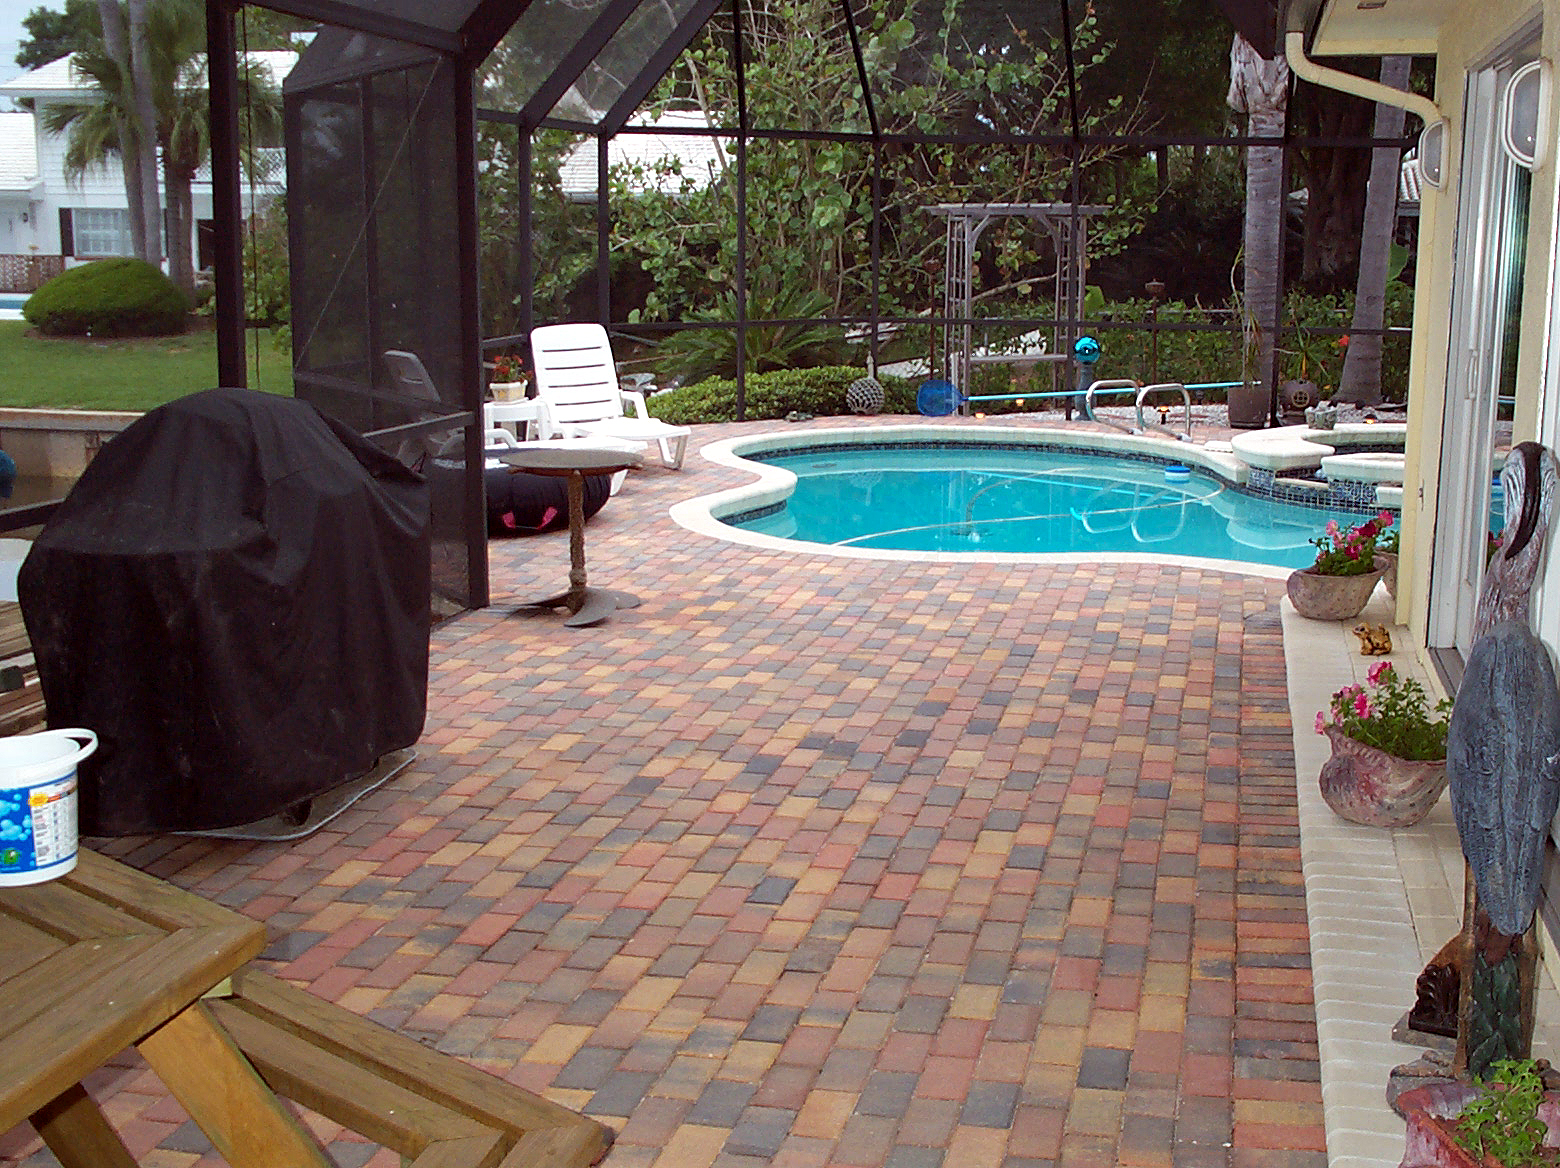 Brick deck with pool